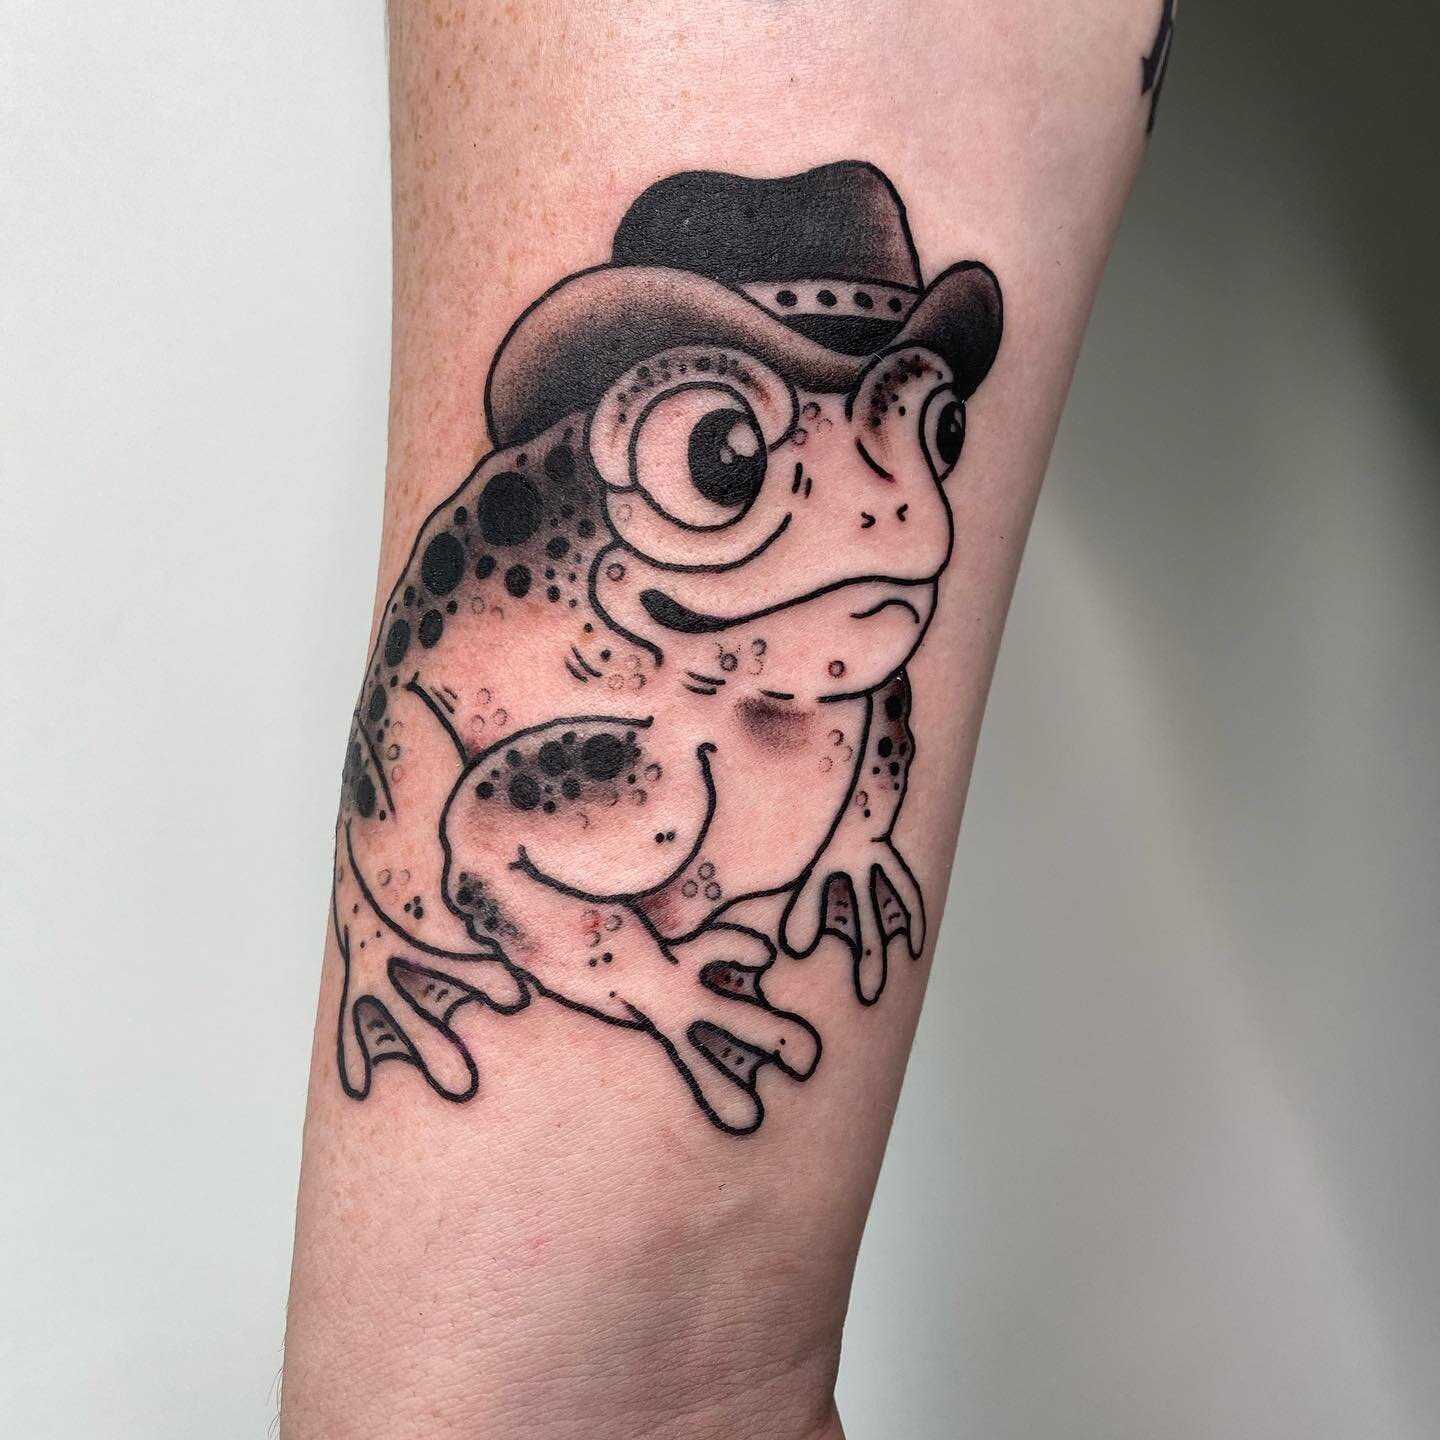 Frog with a hat 
Dm for bookings and enquiries 
 Thanks @willkeetley 
#frog #frogtattoo #frogs #tattoo #blackwork #blacktraditionaltattoo #tattoos #tattooideas #tattooed #tattoostyle #tattooist#tattooing #blacktattoo #traditionaltattoo #blackworkers_